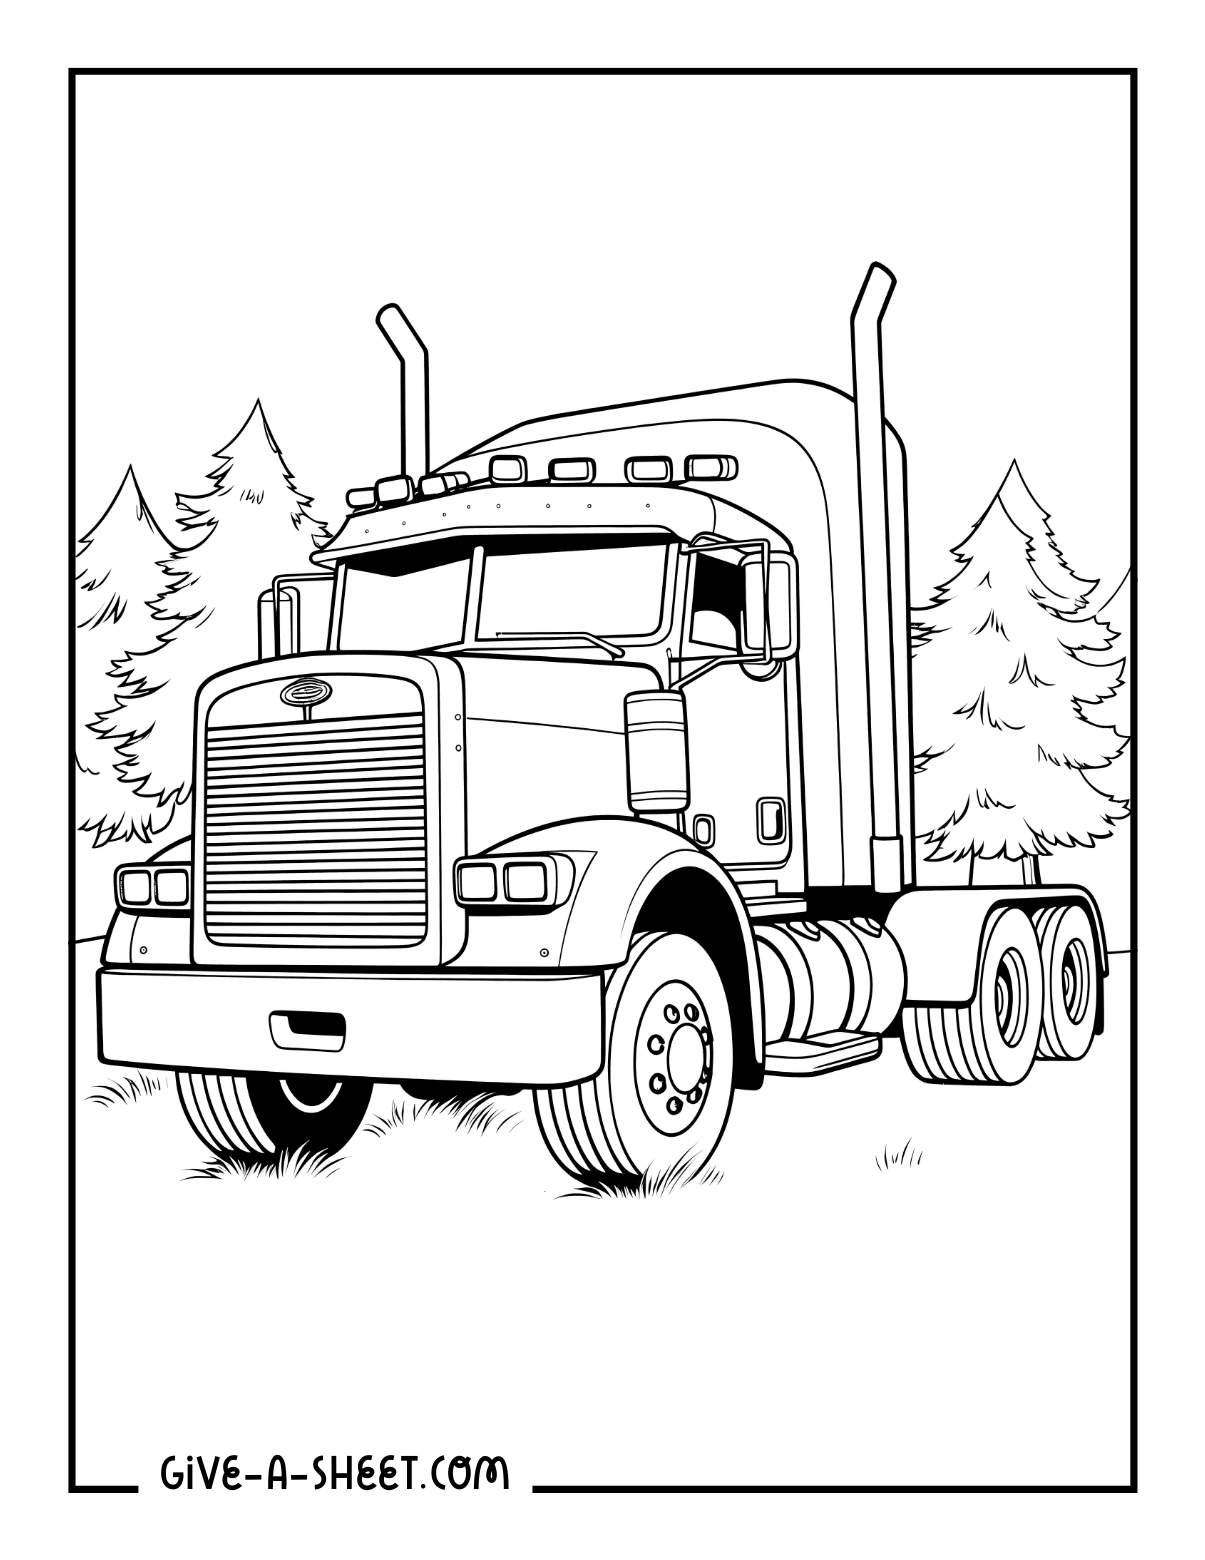 Forest truck coloring book for adults.